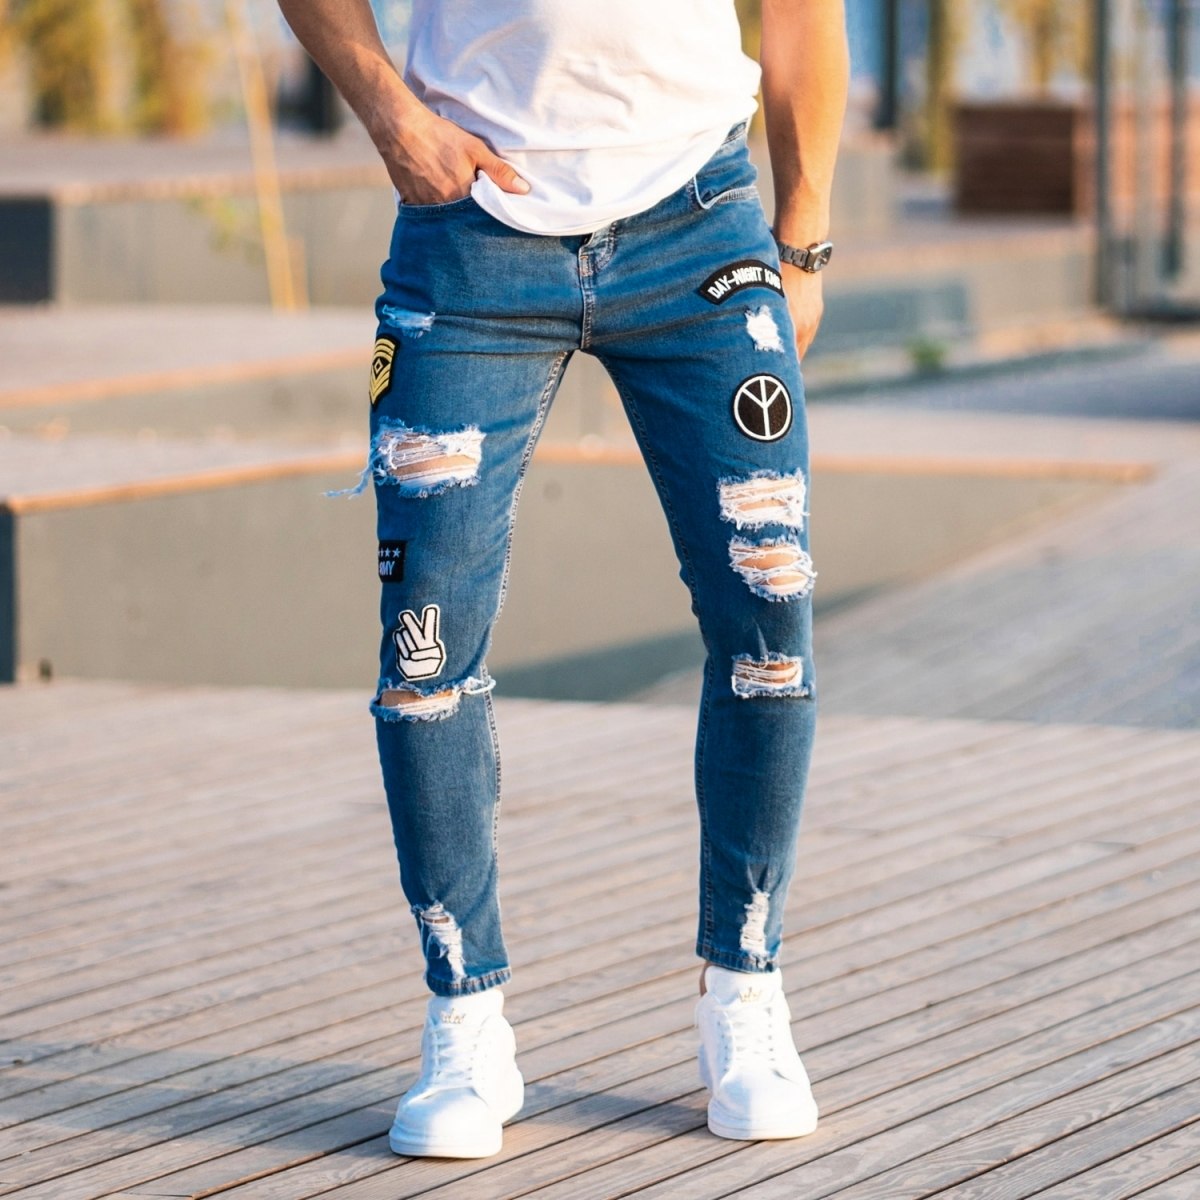 Men's Patchworked Jeans In Blue